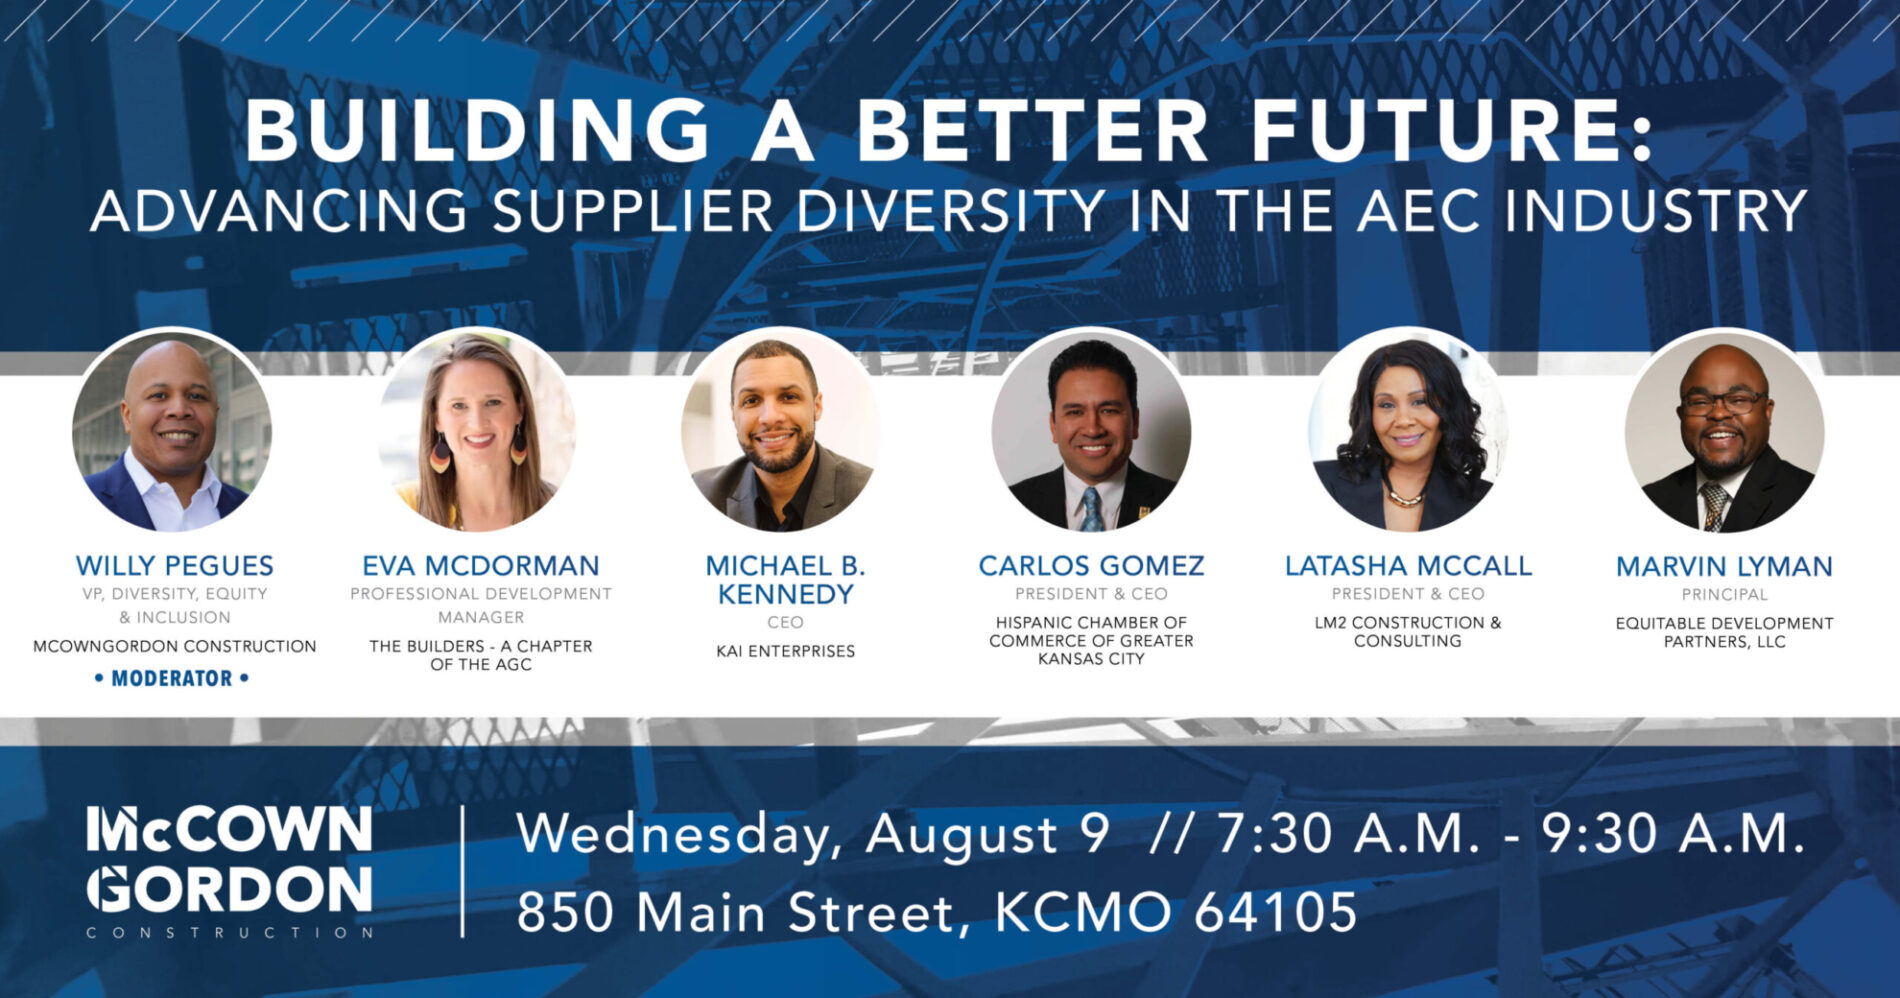 McCownGordon recently hosted a panel about advancing supplier diversity in the AEC industry